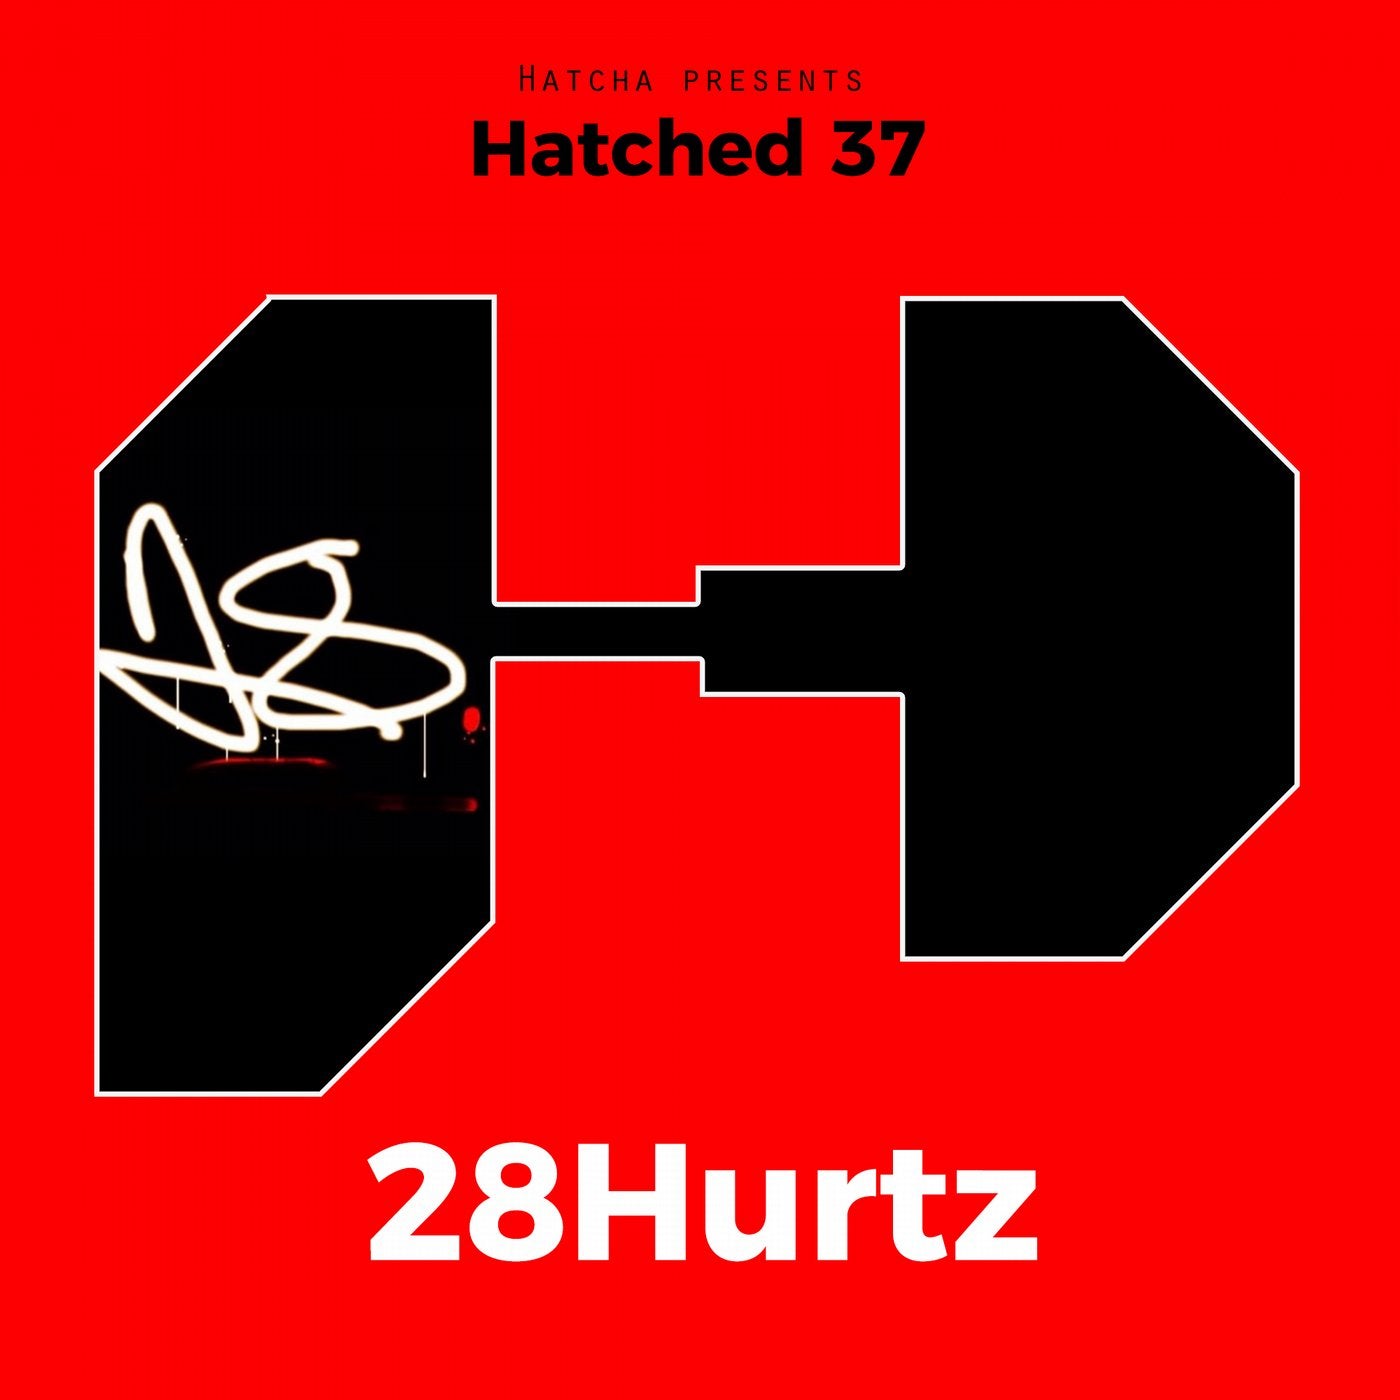 Hatched 37